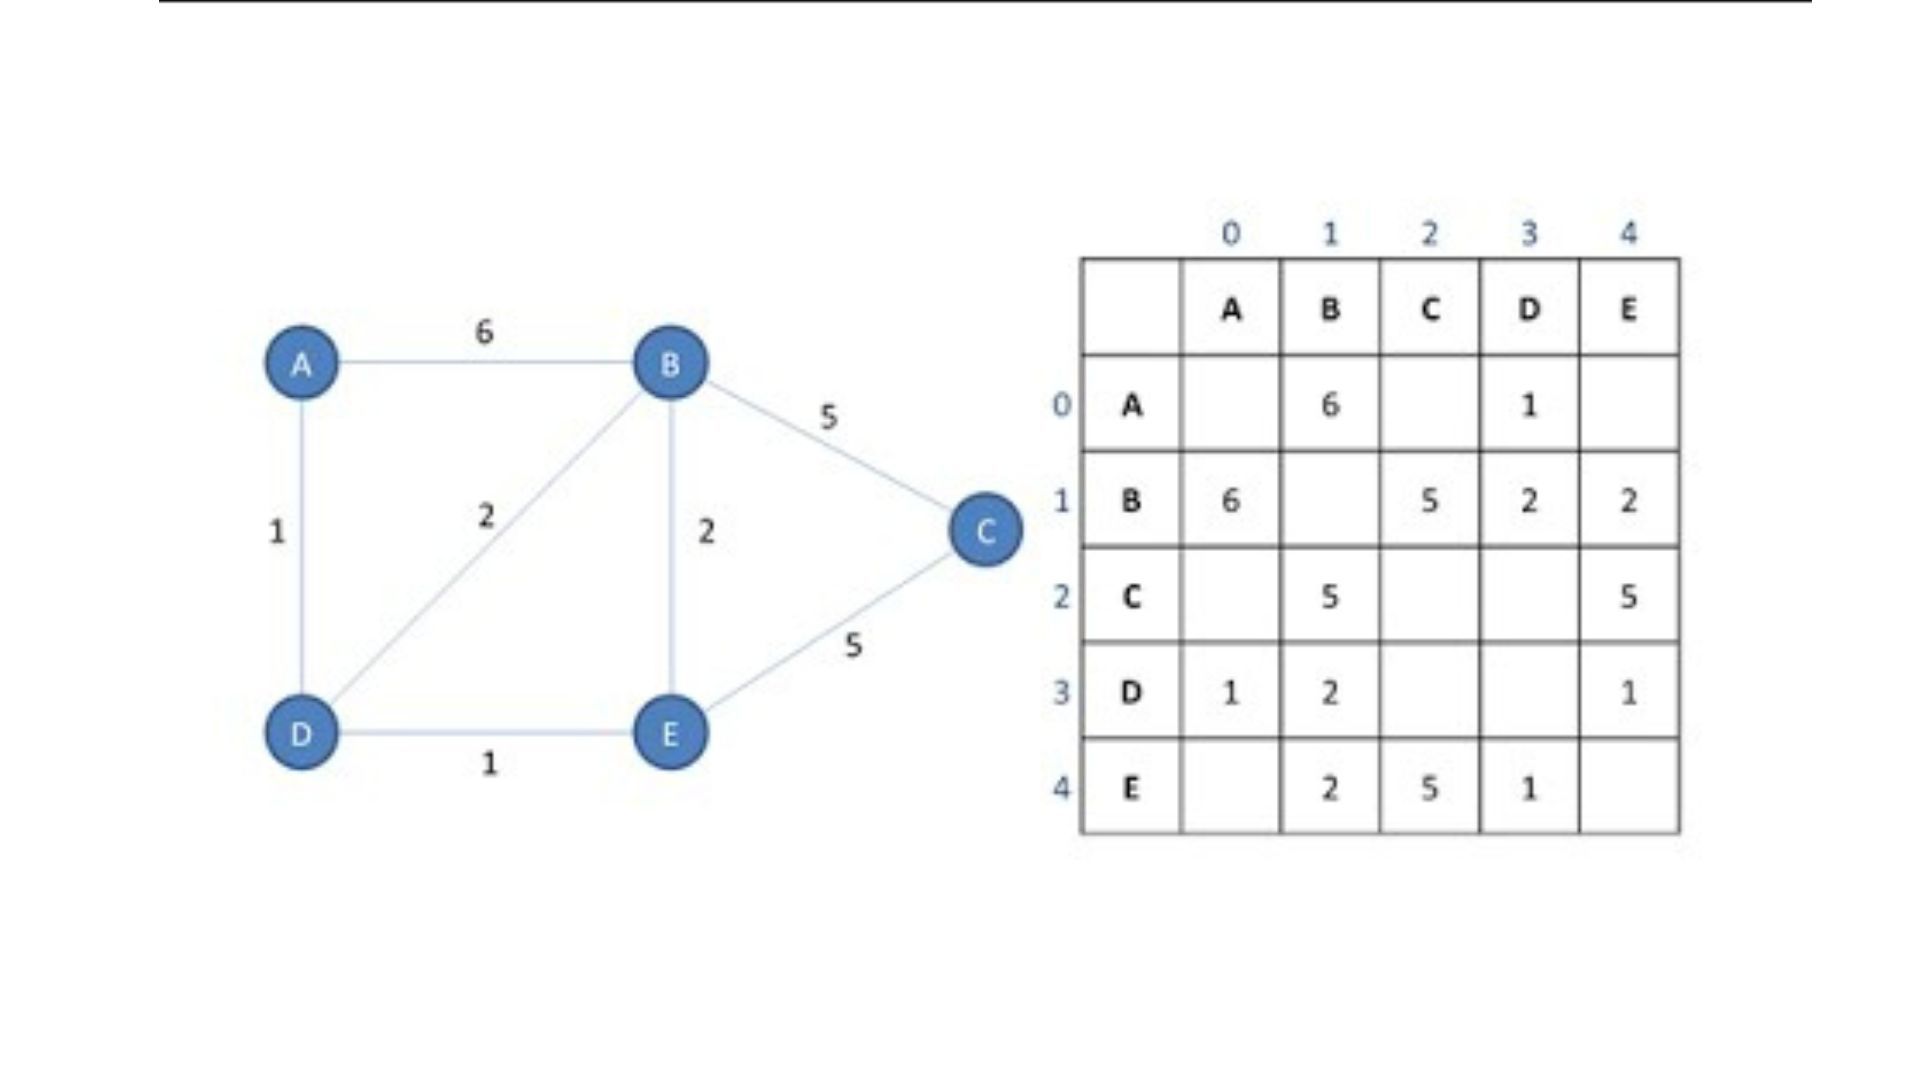 A Brief Introduction to Graphs in Data Structures